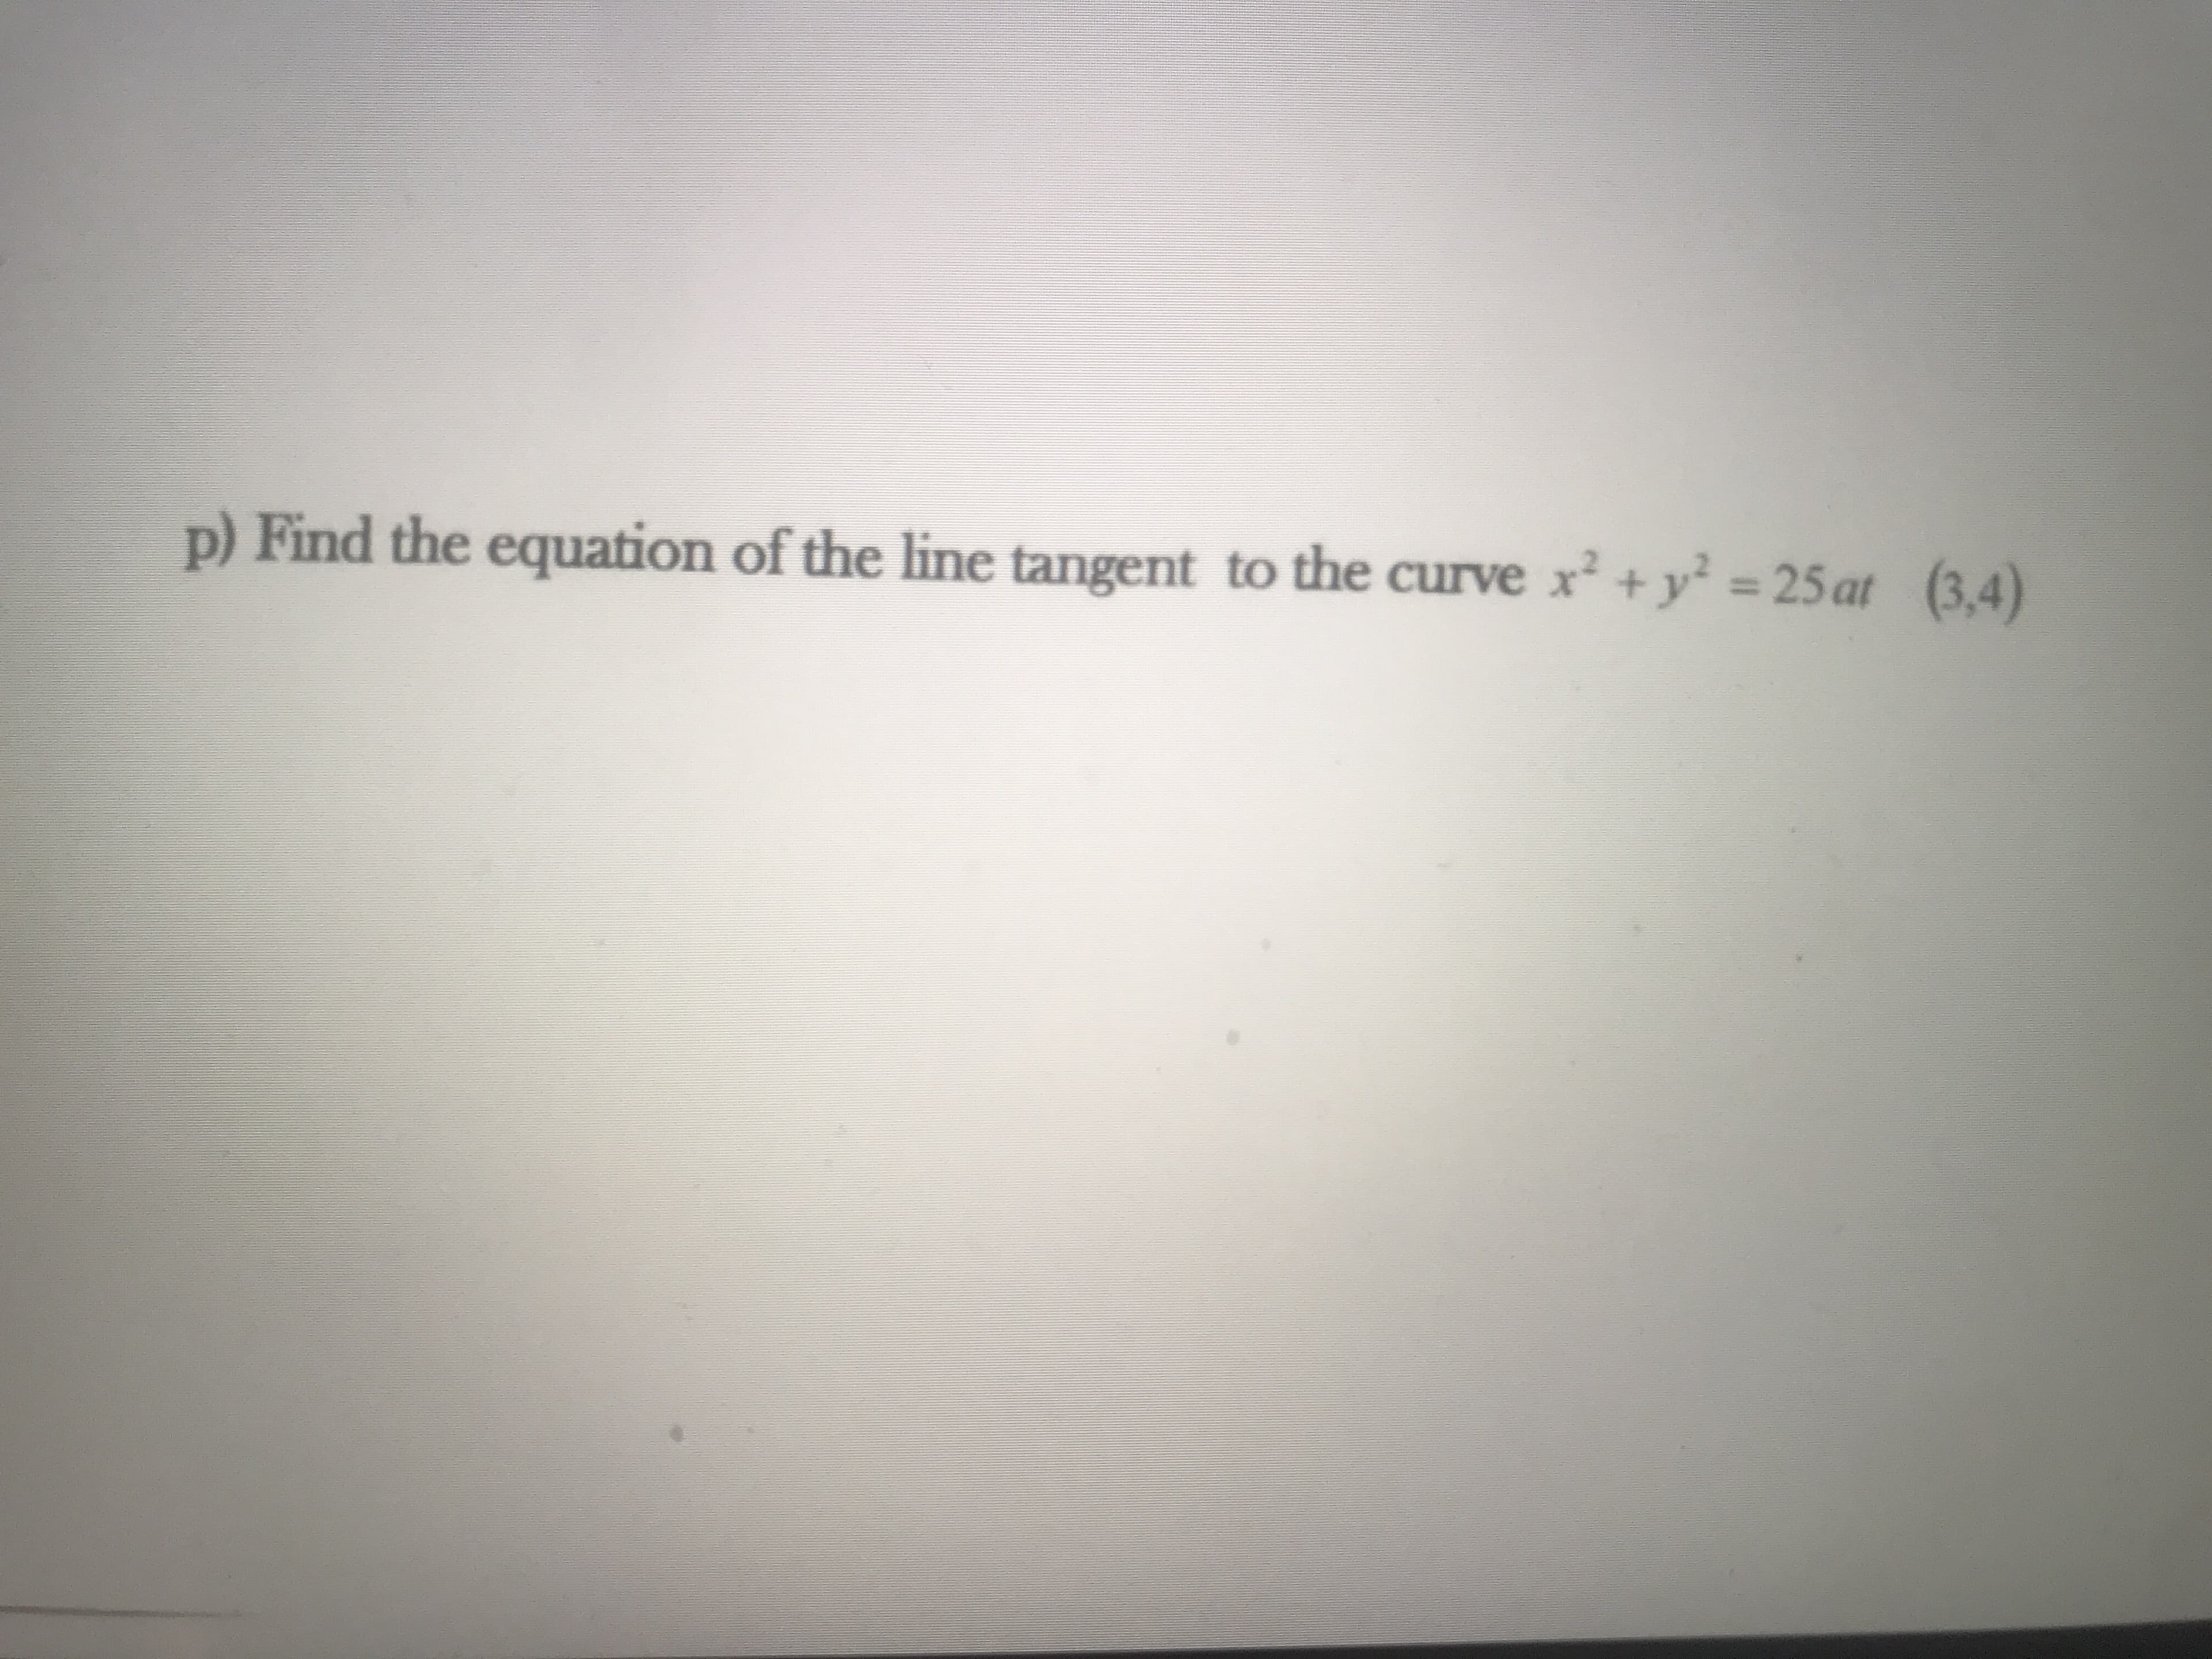 p) Find the equation of the line tangent to the curve x² + y² = 25 at (3,4)
%3D
